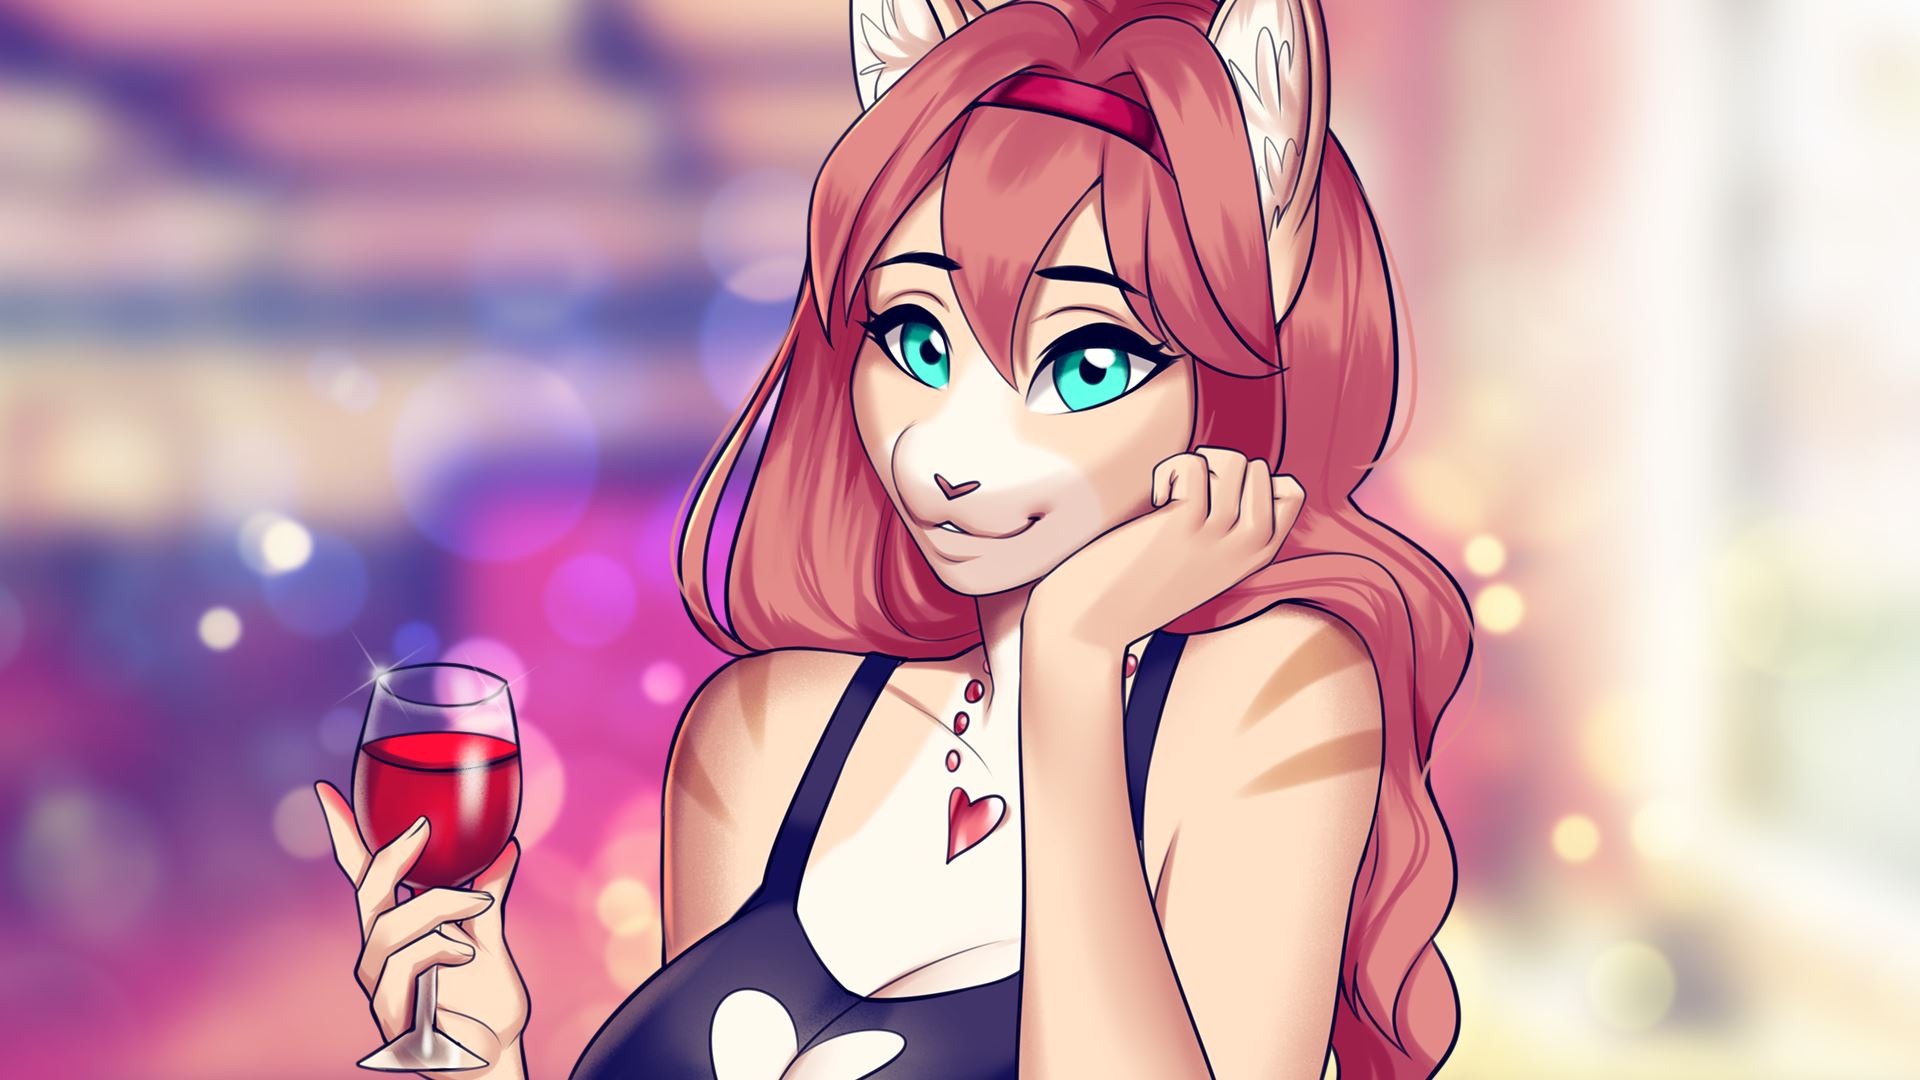 My Furry Maid [Finished] - Version: Final